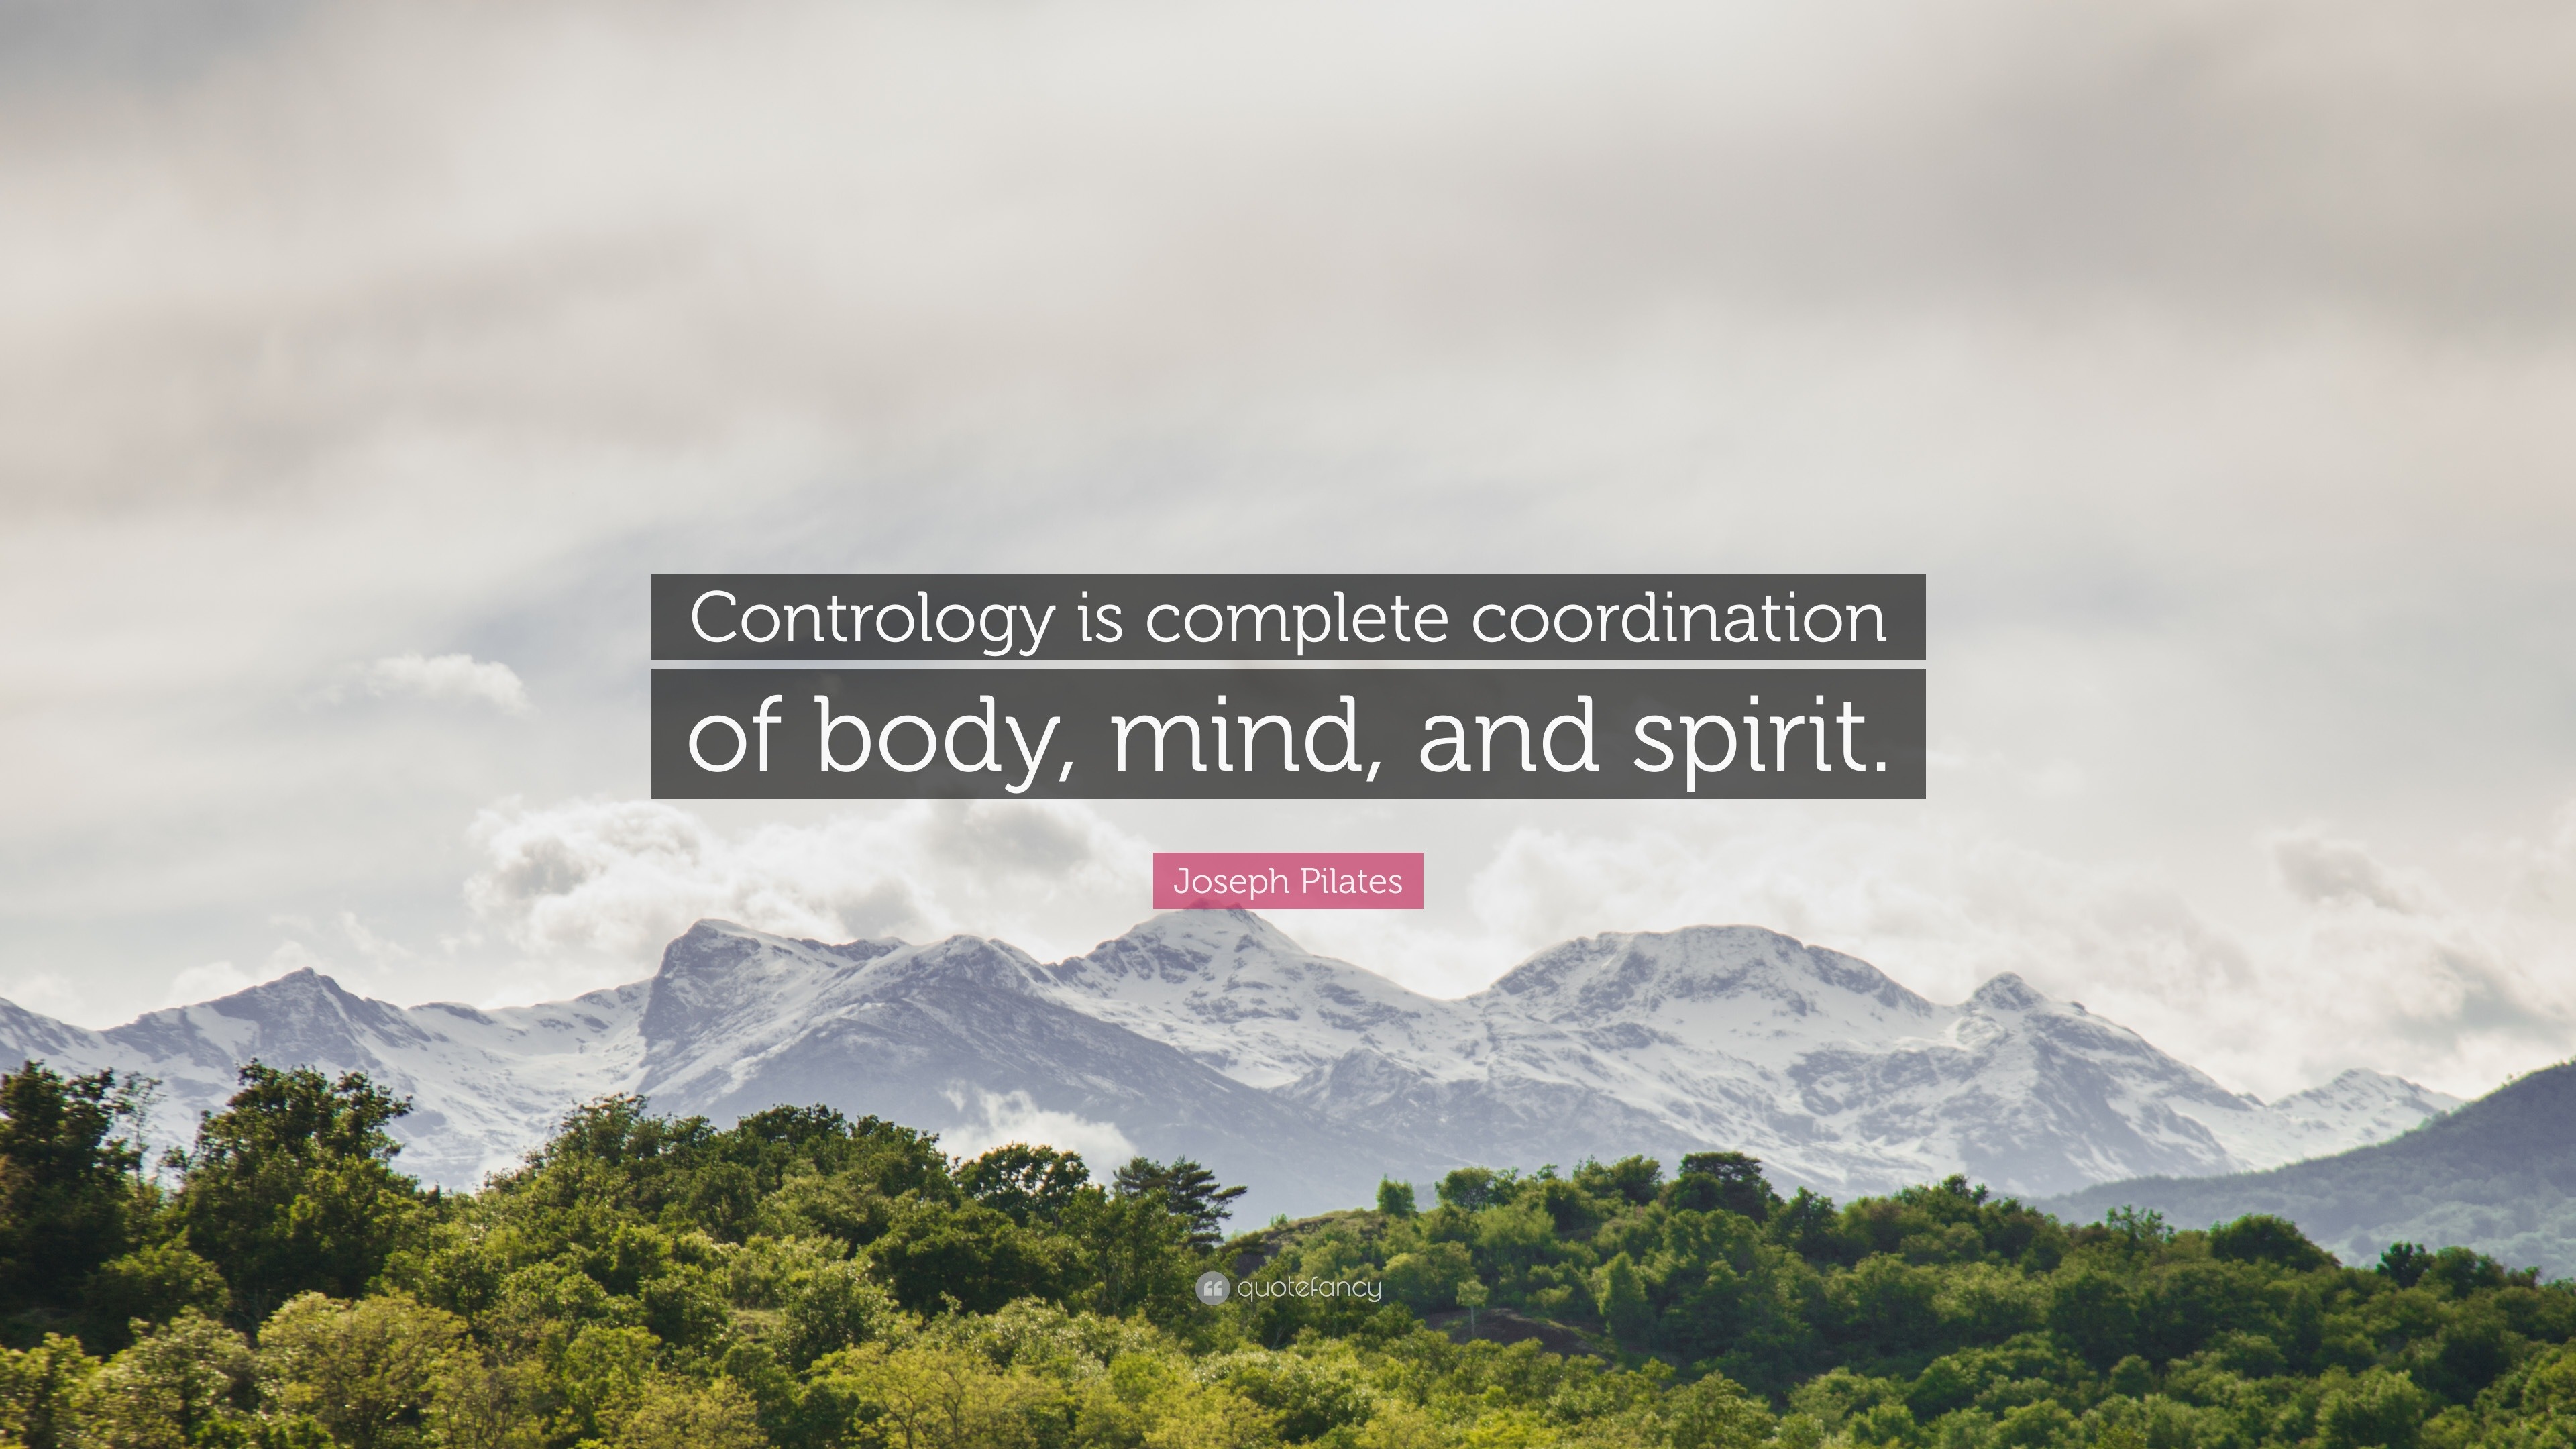 Joseph Pilates Quote: “Contrology is complete coordination of body